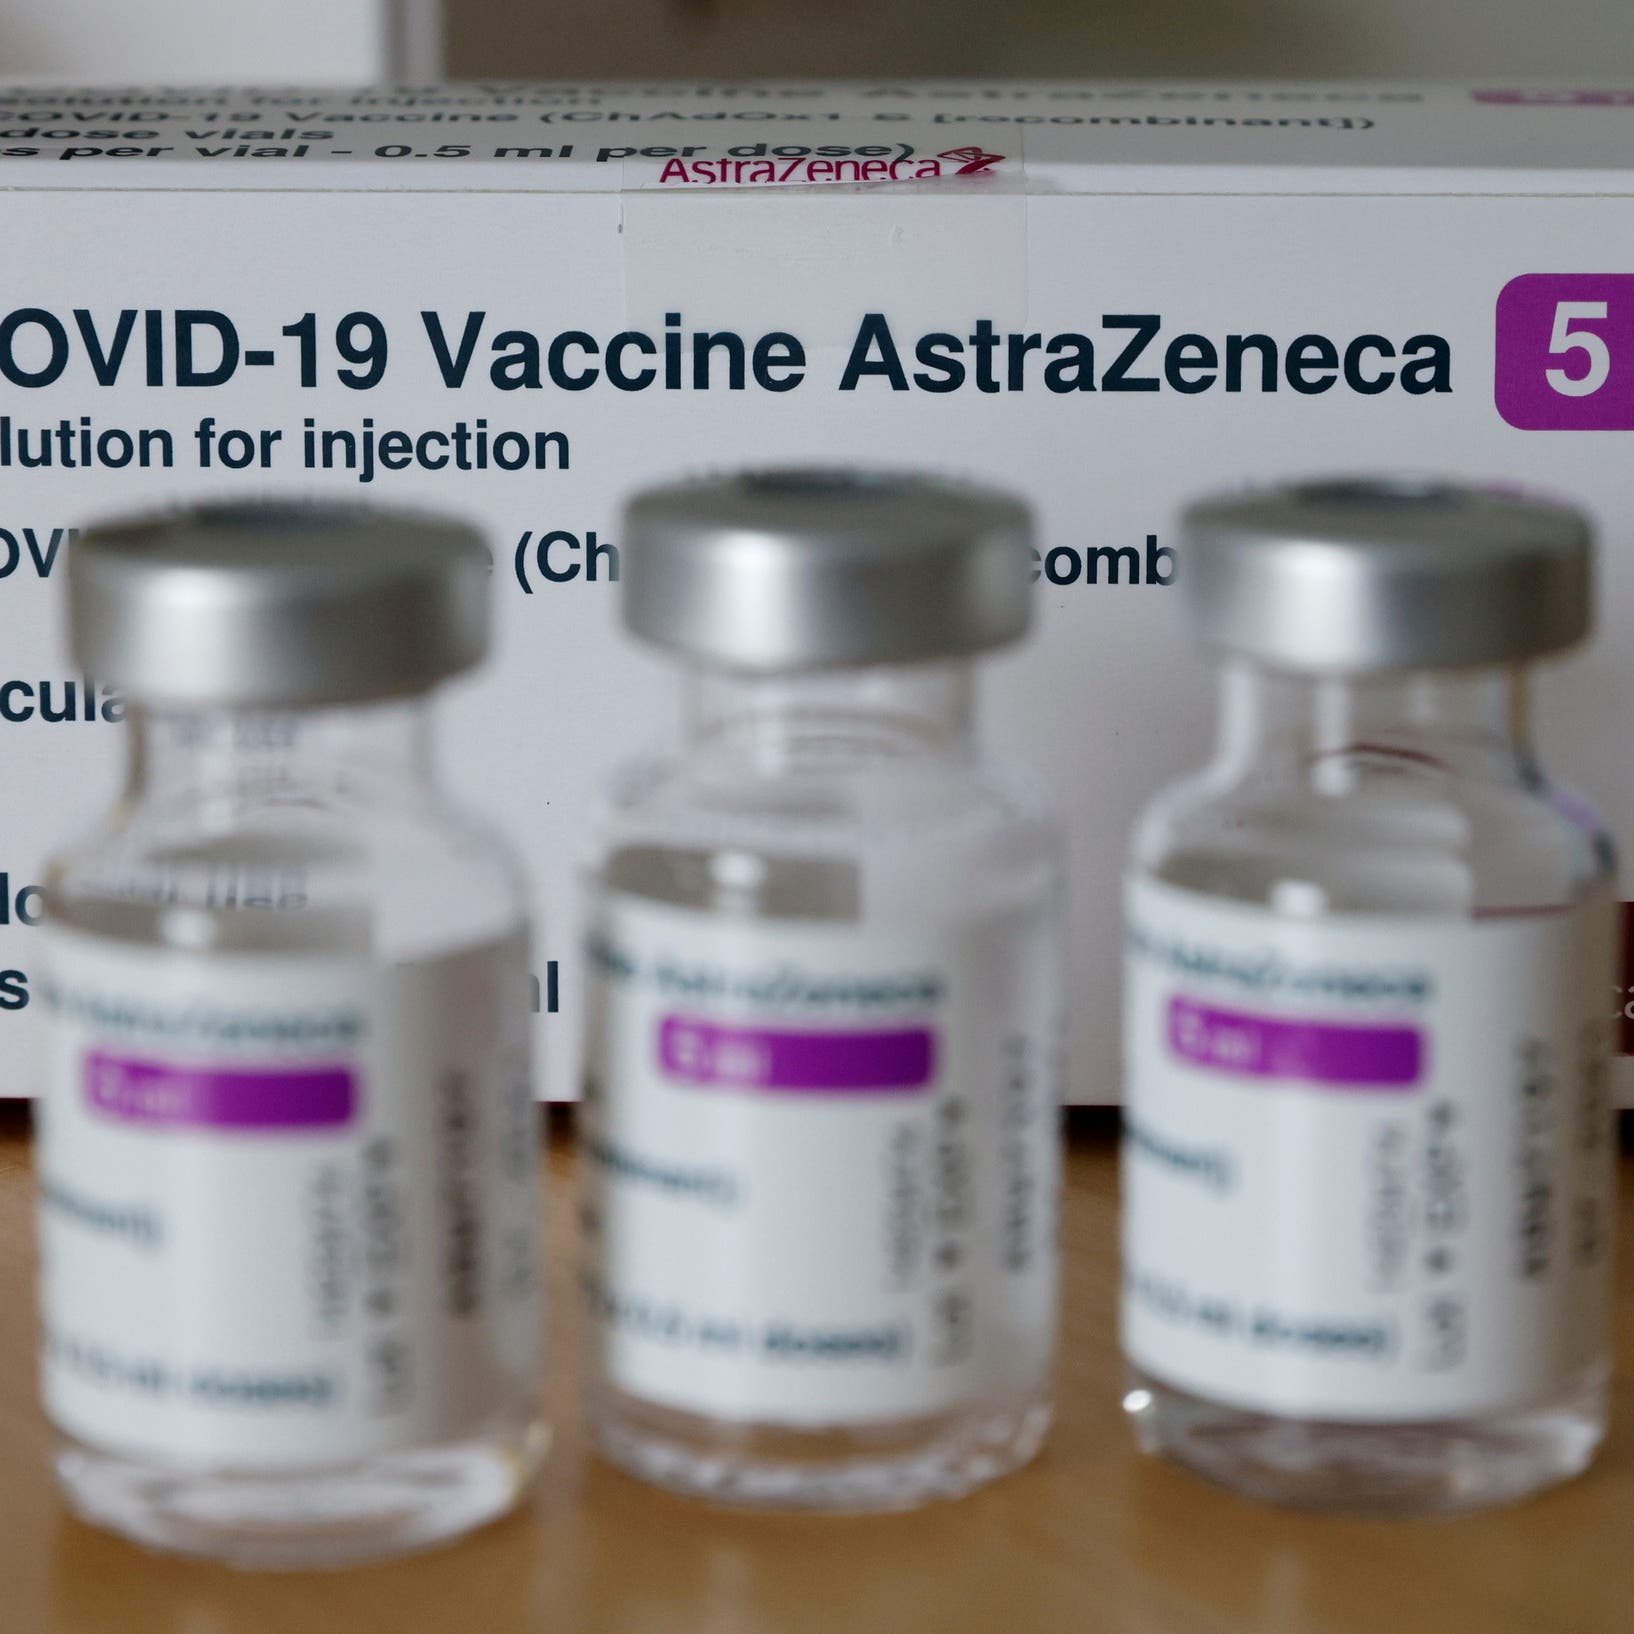 UK confident vaccines protect against Indian variant